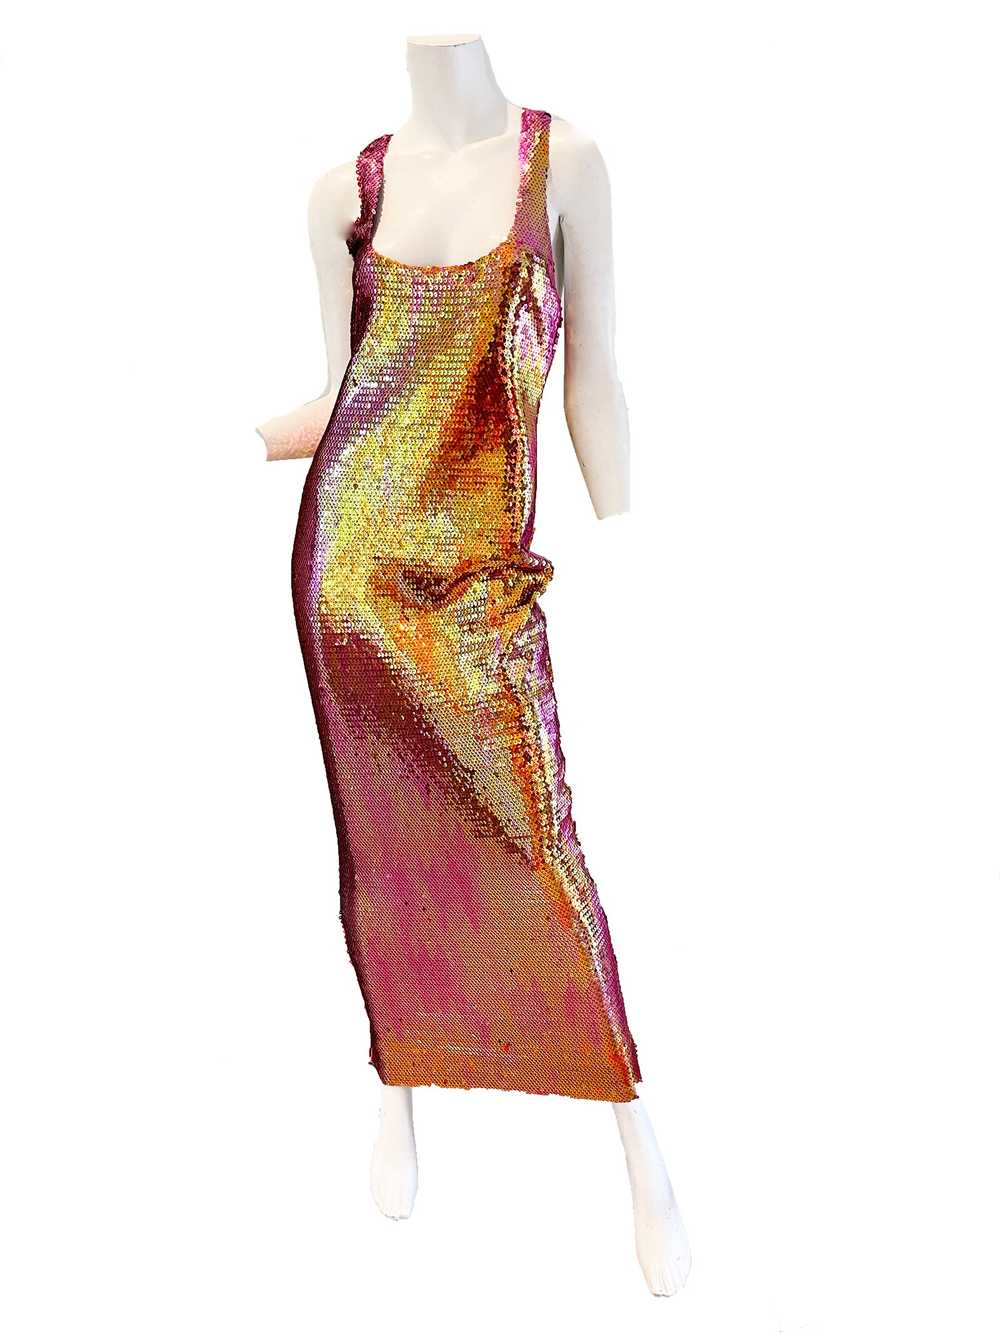 1988 STEPHEN SPROUSE Sequin Gown - image 1